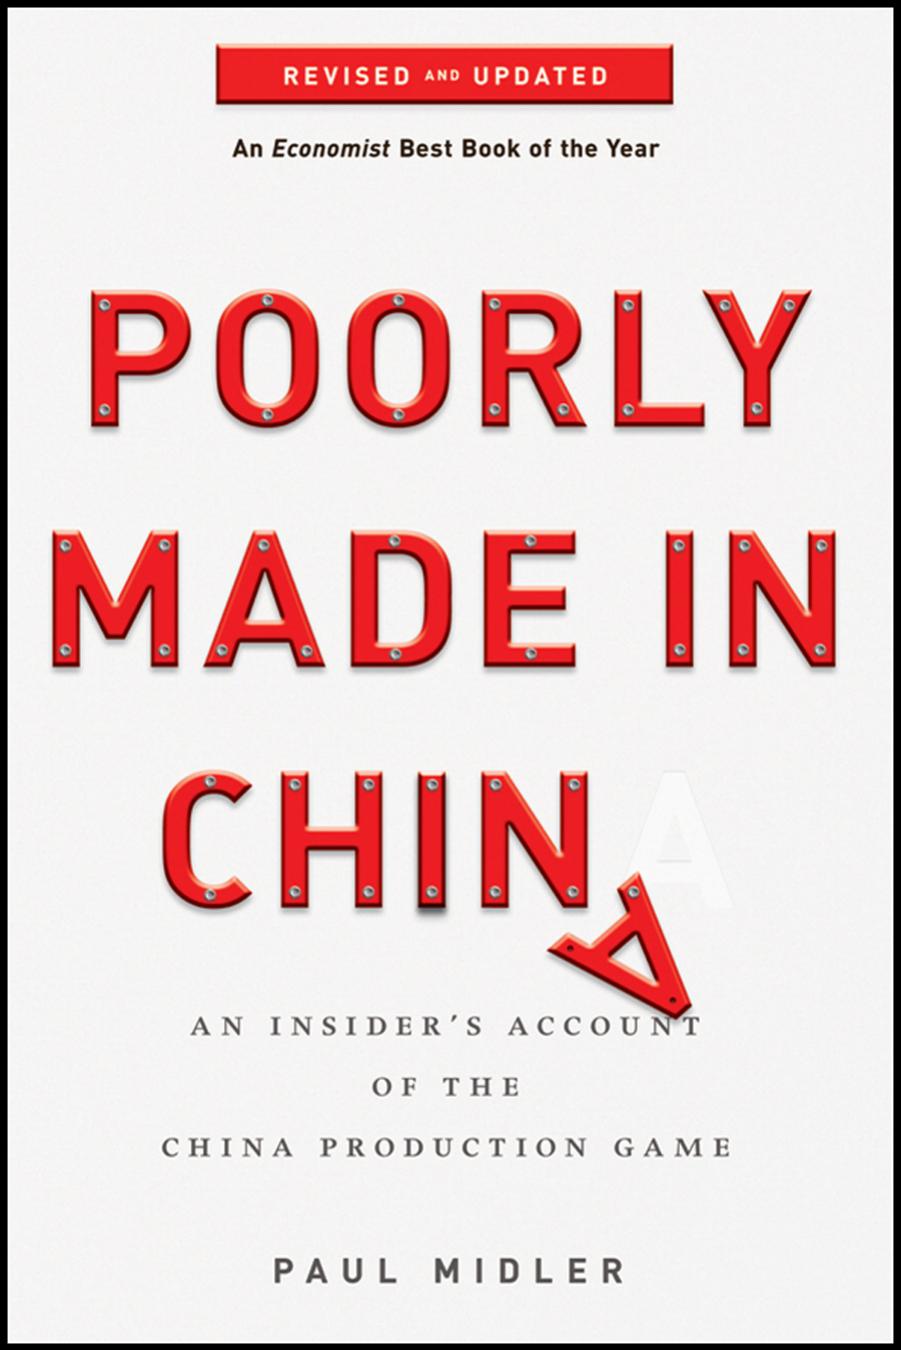 POORLY MADE IN CHINA : AN INSIDERâS ACCOUNT OF THE CHINA PRODUCTION GAME by PAUL MIDLER